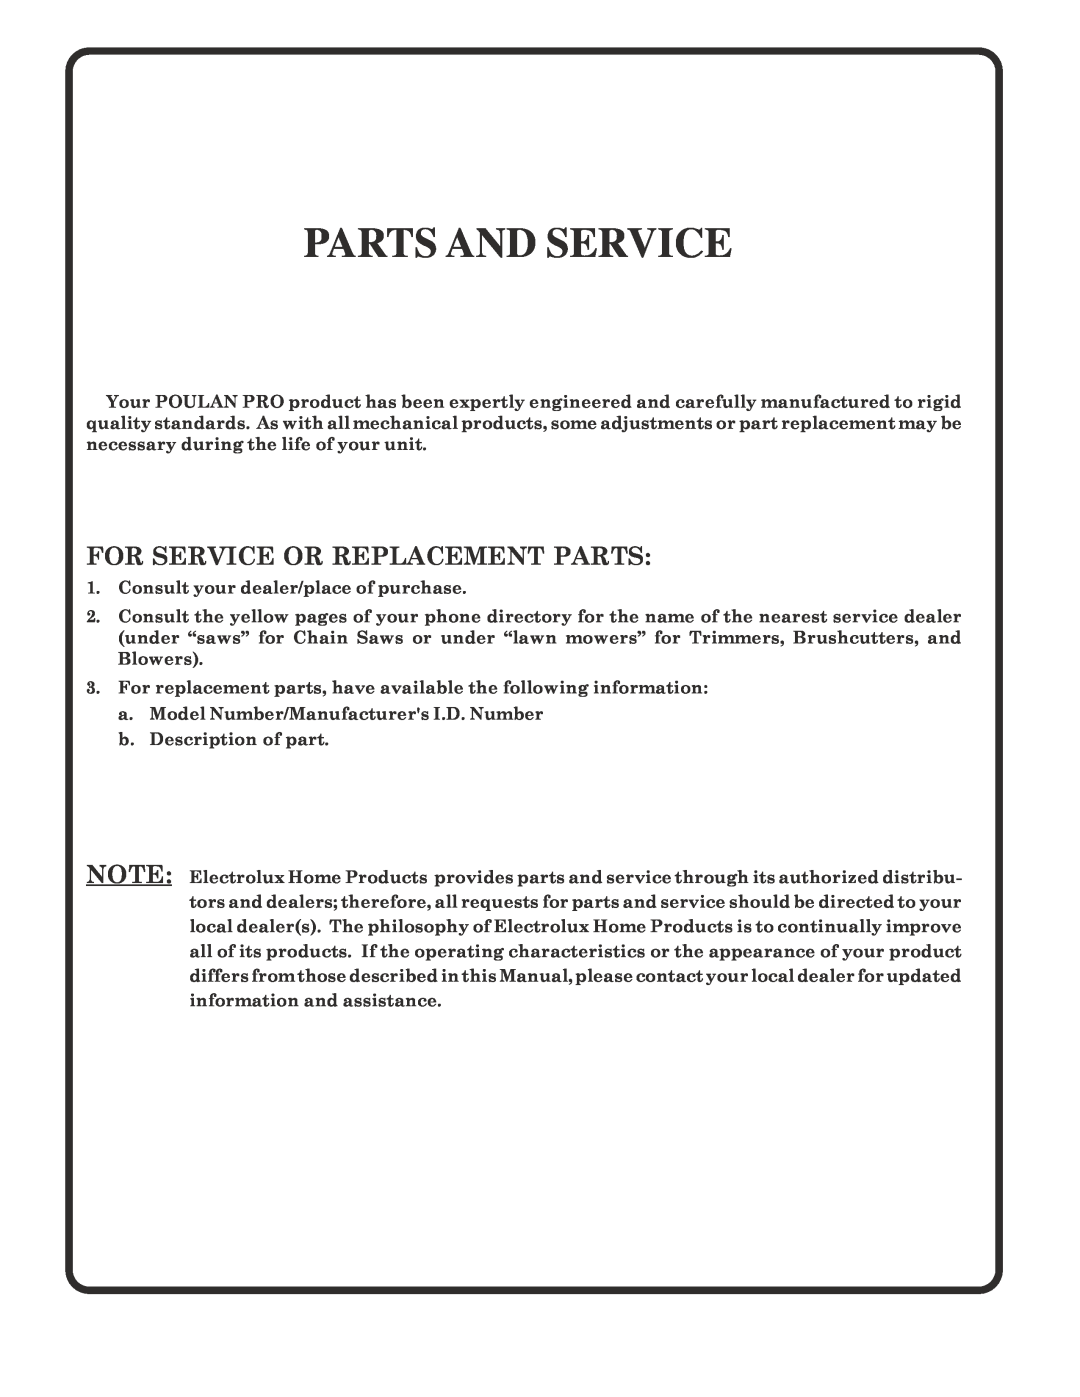 Poulan 183041 owner manual Parts And Service, For Service Or Replacement Parts 